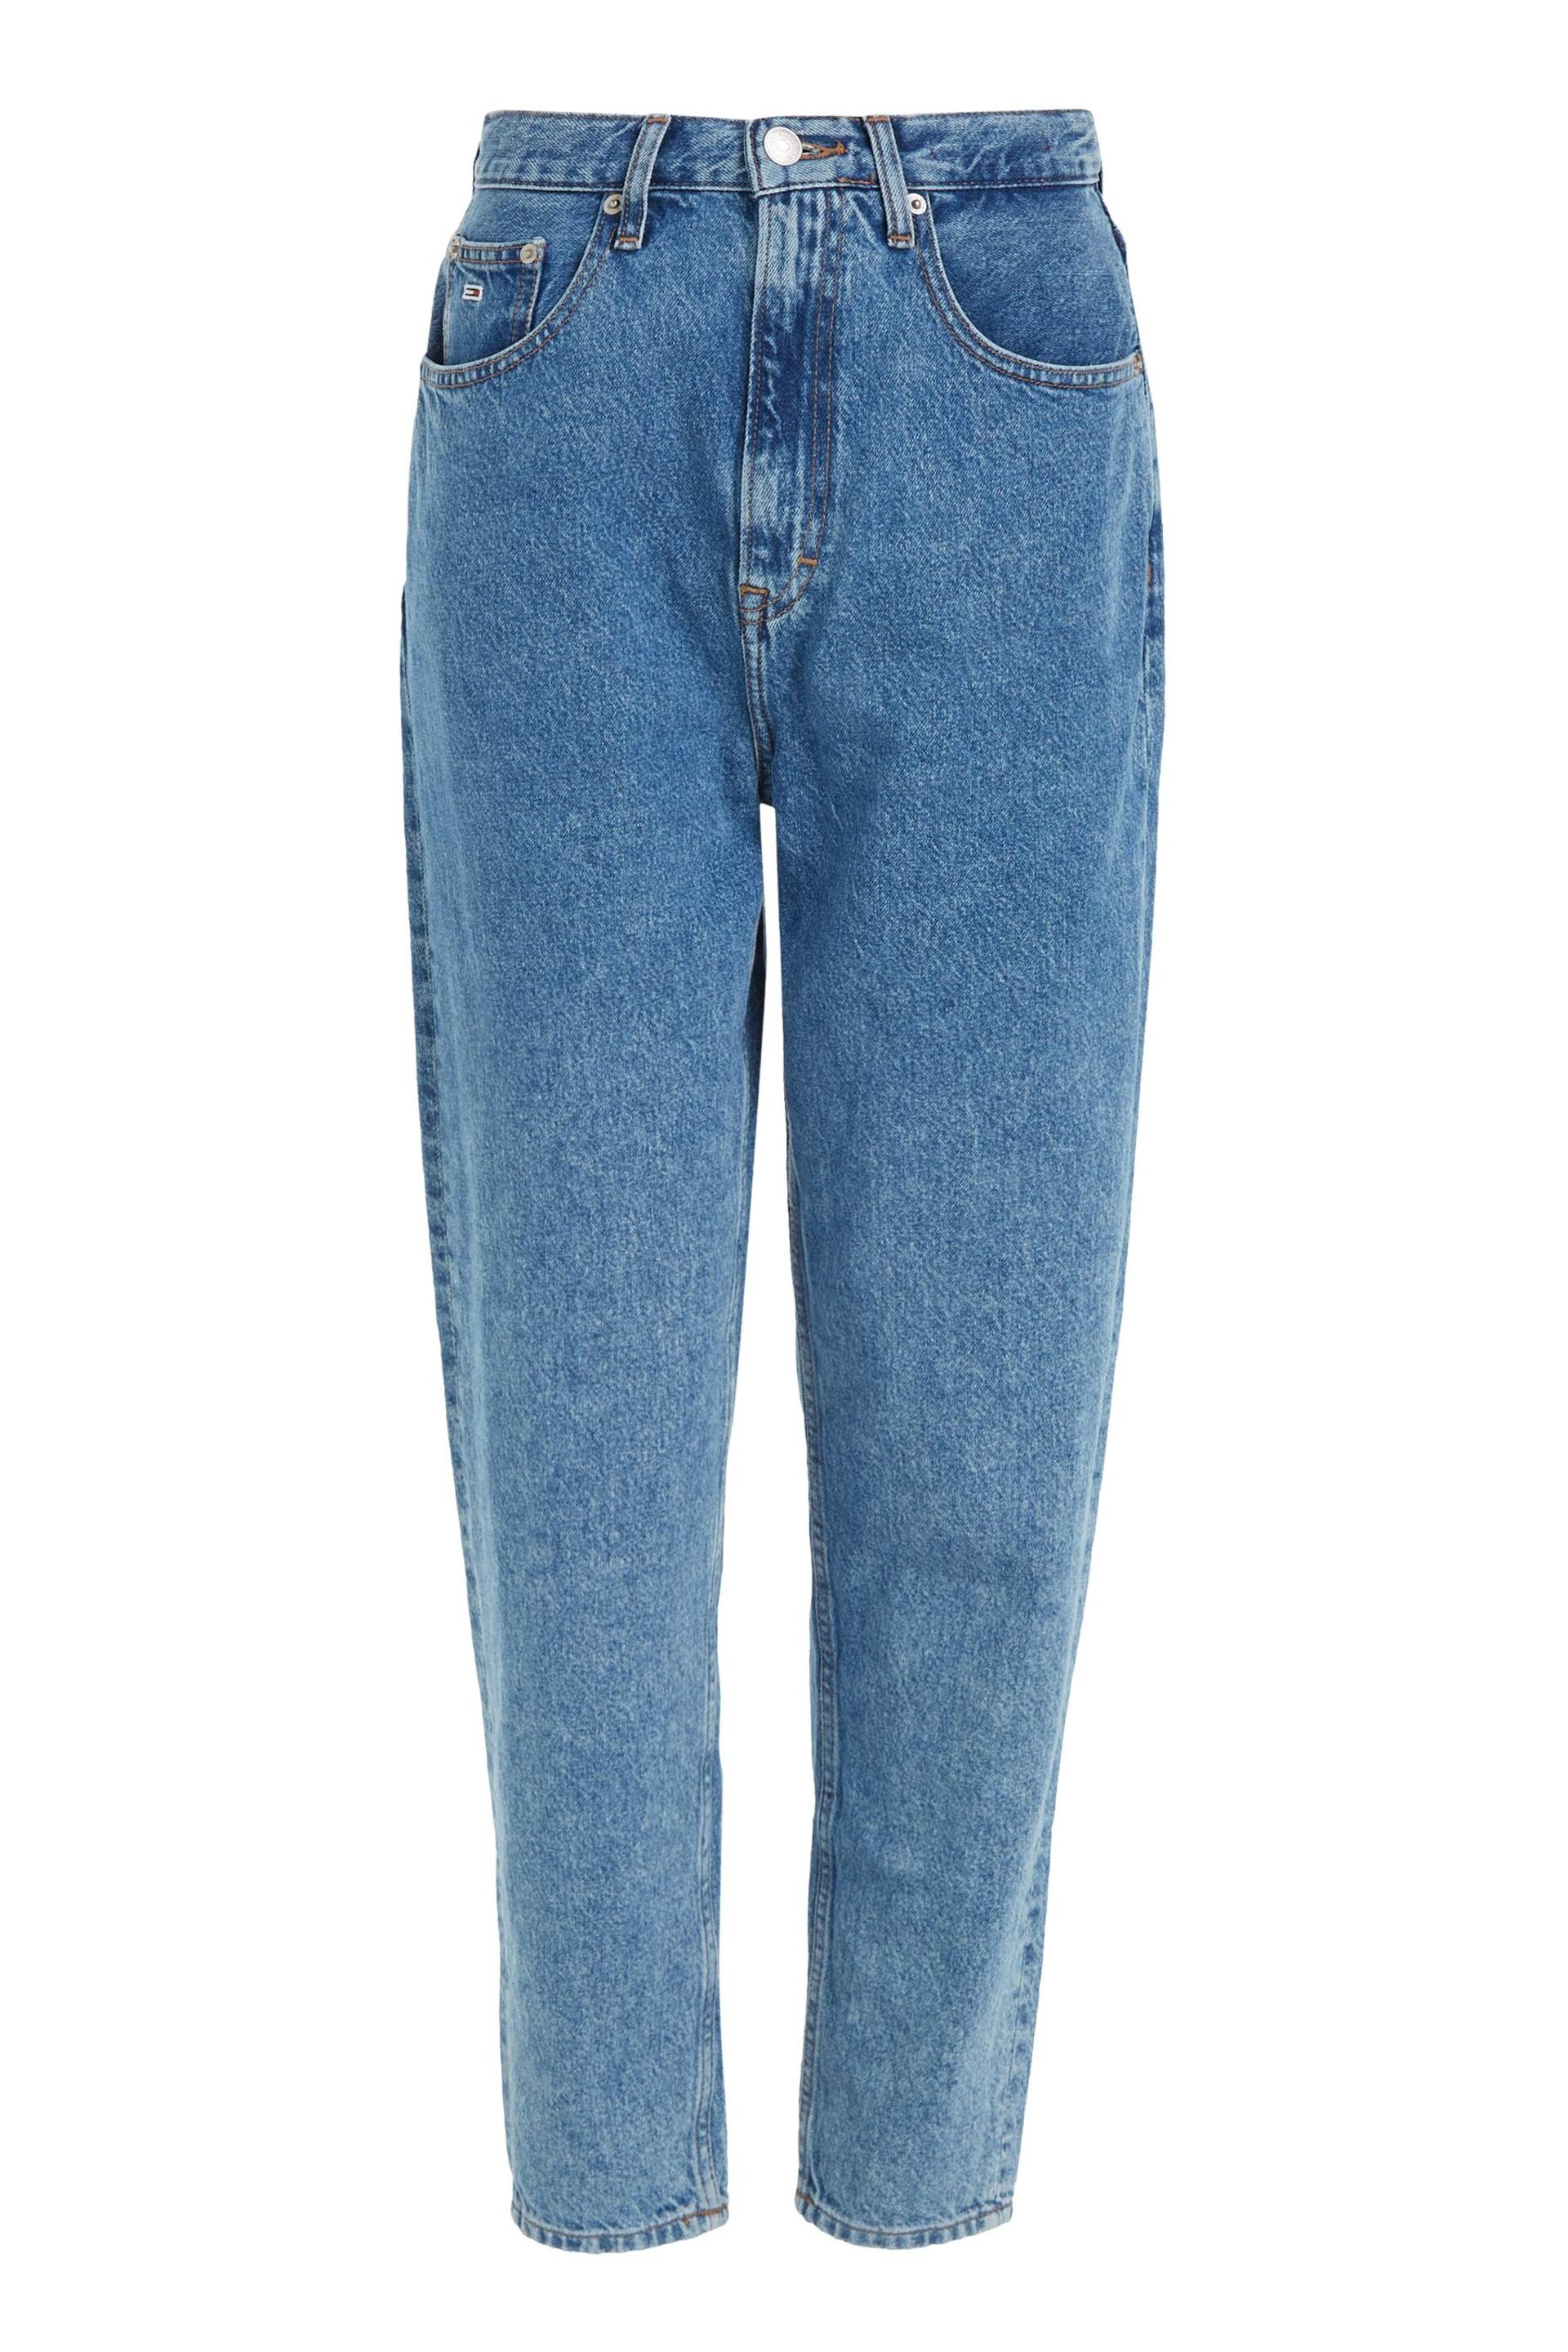 Tommy Jeans Blue Ultra High Rise Tapered Mom Jeans - Image 9 of 11